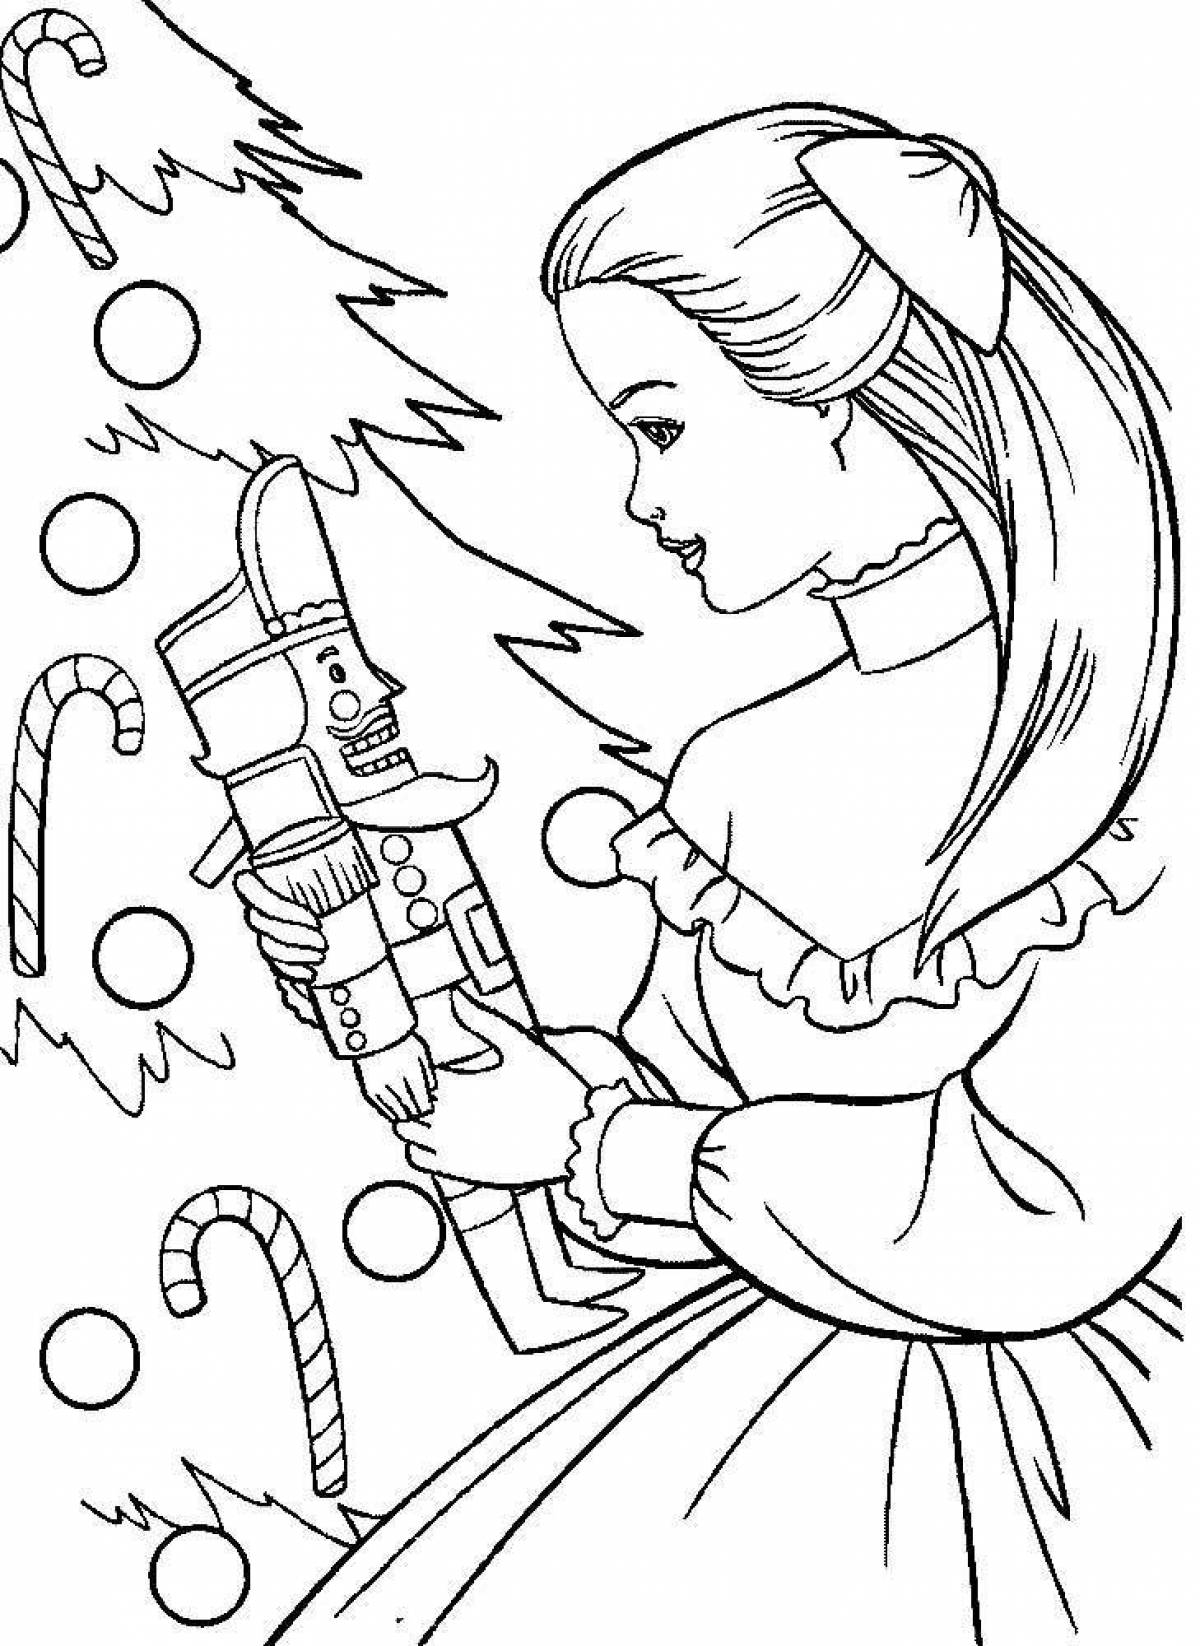 Brilliant nutcracker and mouse king coloring book